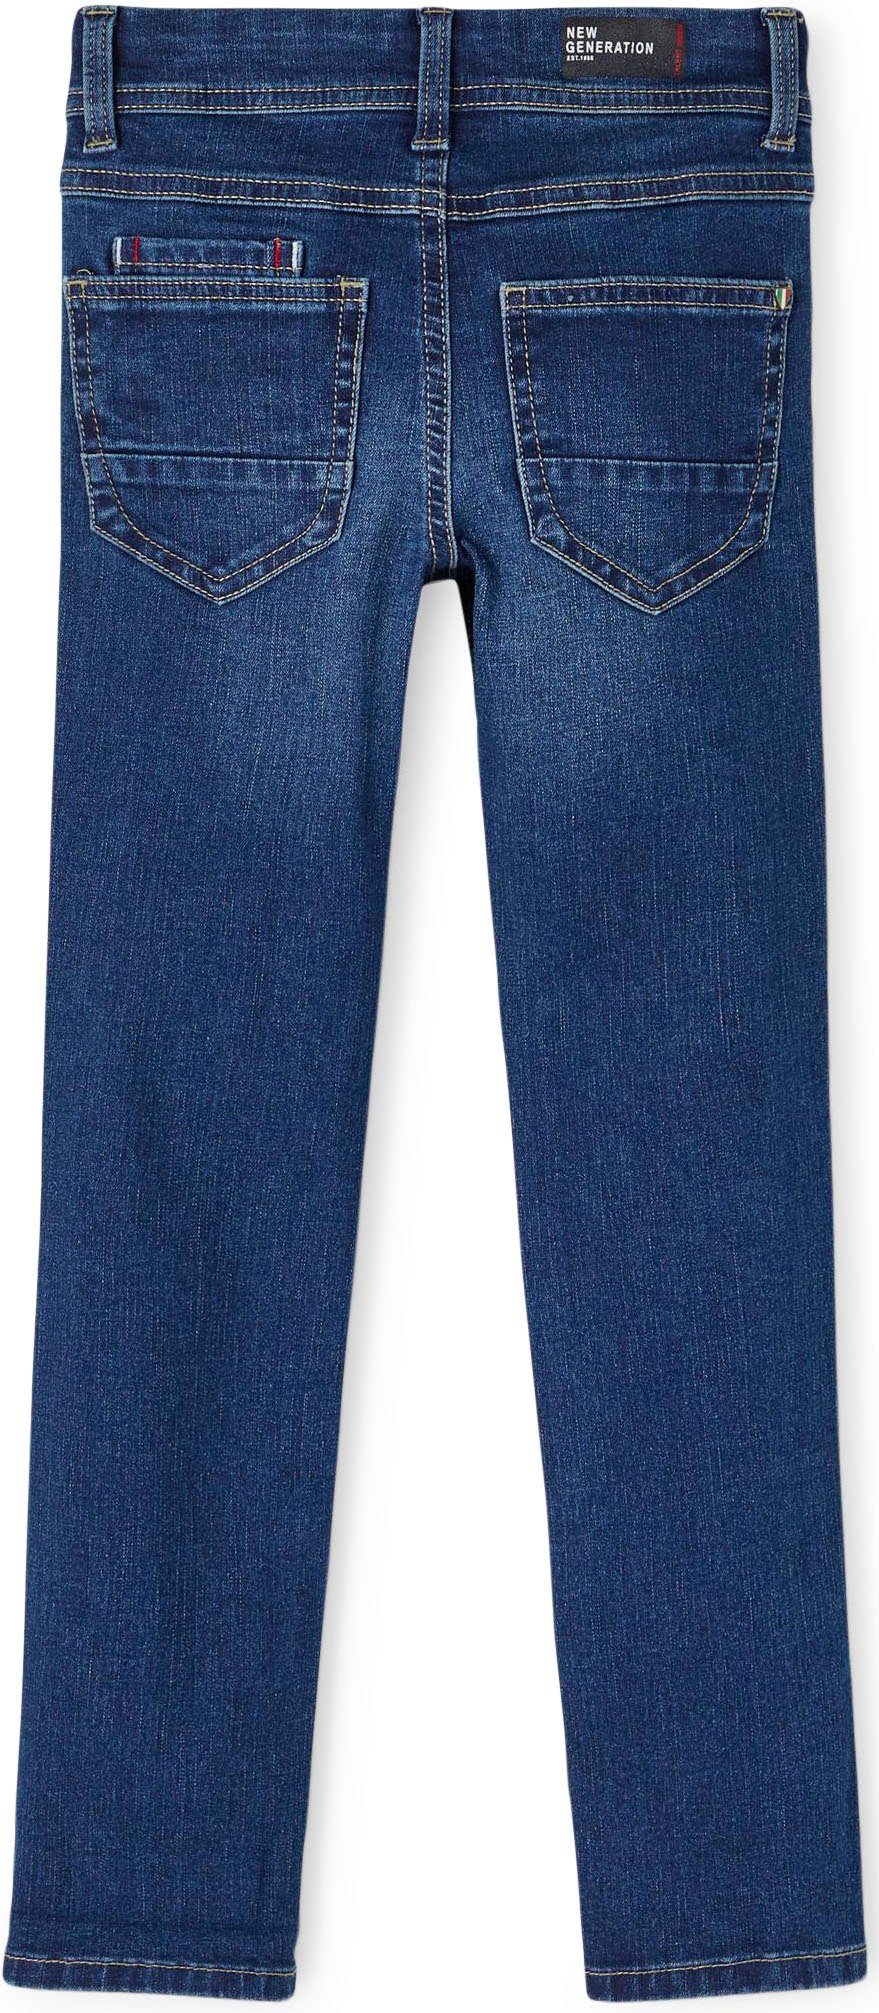 de OTTO Name It jeans PANT Stretch 3618 shop online DNMTAUL in NKMTHEO |